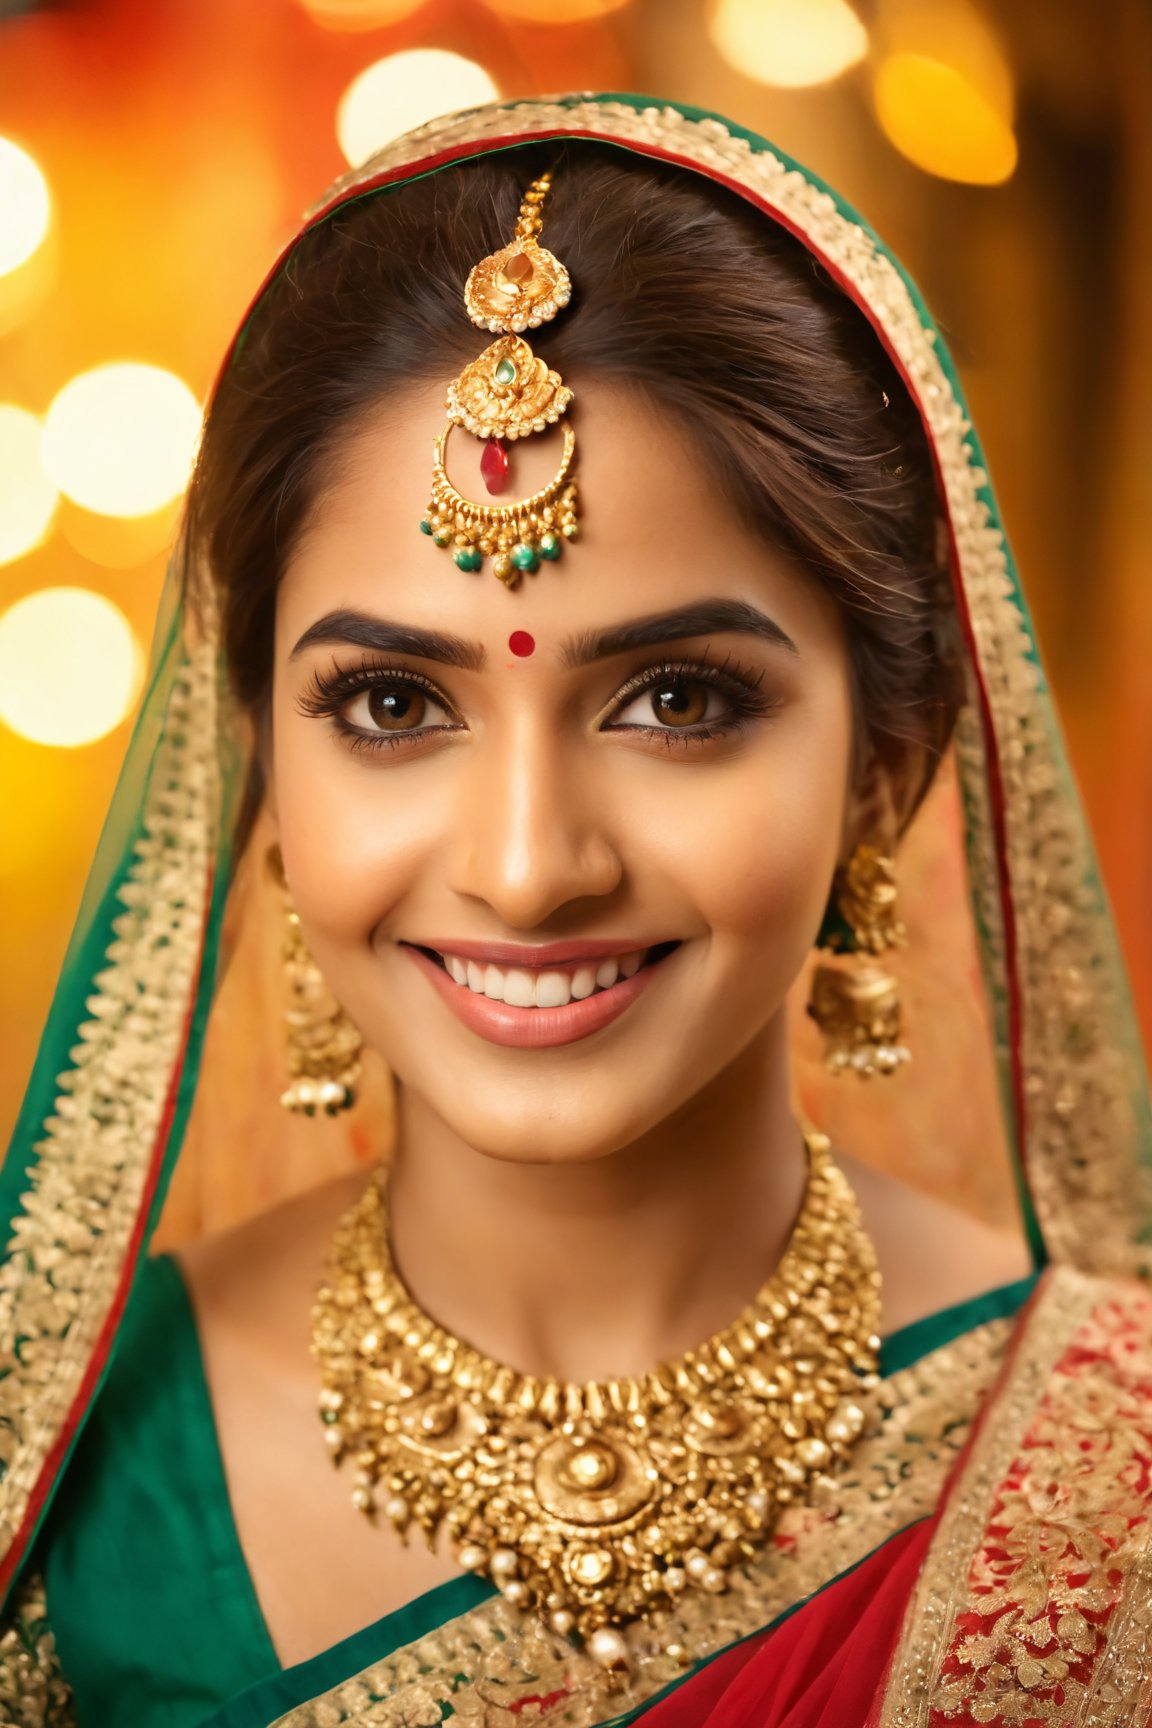 (best quality,4k,8k,highres,masterpiece:1.2),ultra-detailed,(realistic,photorealistic,photo-realistic:1.37),beautiful indian woman,close-up portrait,expressive eyes,long eyelashes,radiant smile,vibrant traditional attire,ornate jewelry,soft and glowing skin,subtle makeup,intricate henna design,graceful pose,golden hour lighting,colorful background,ethereal beauty,warm color tones,bokeh